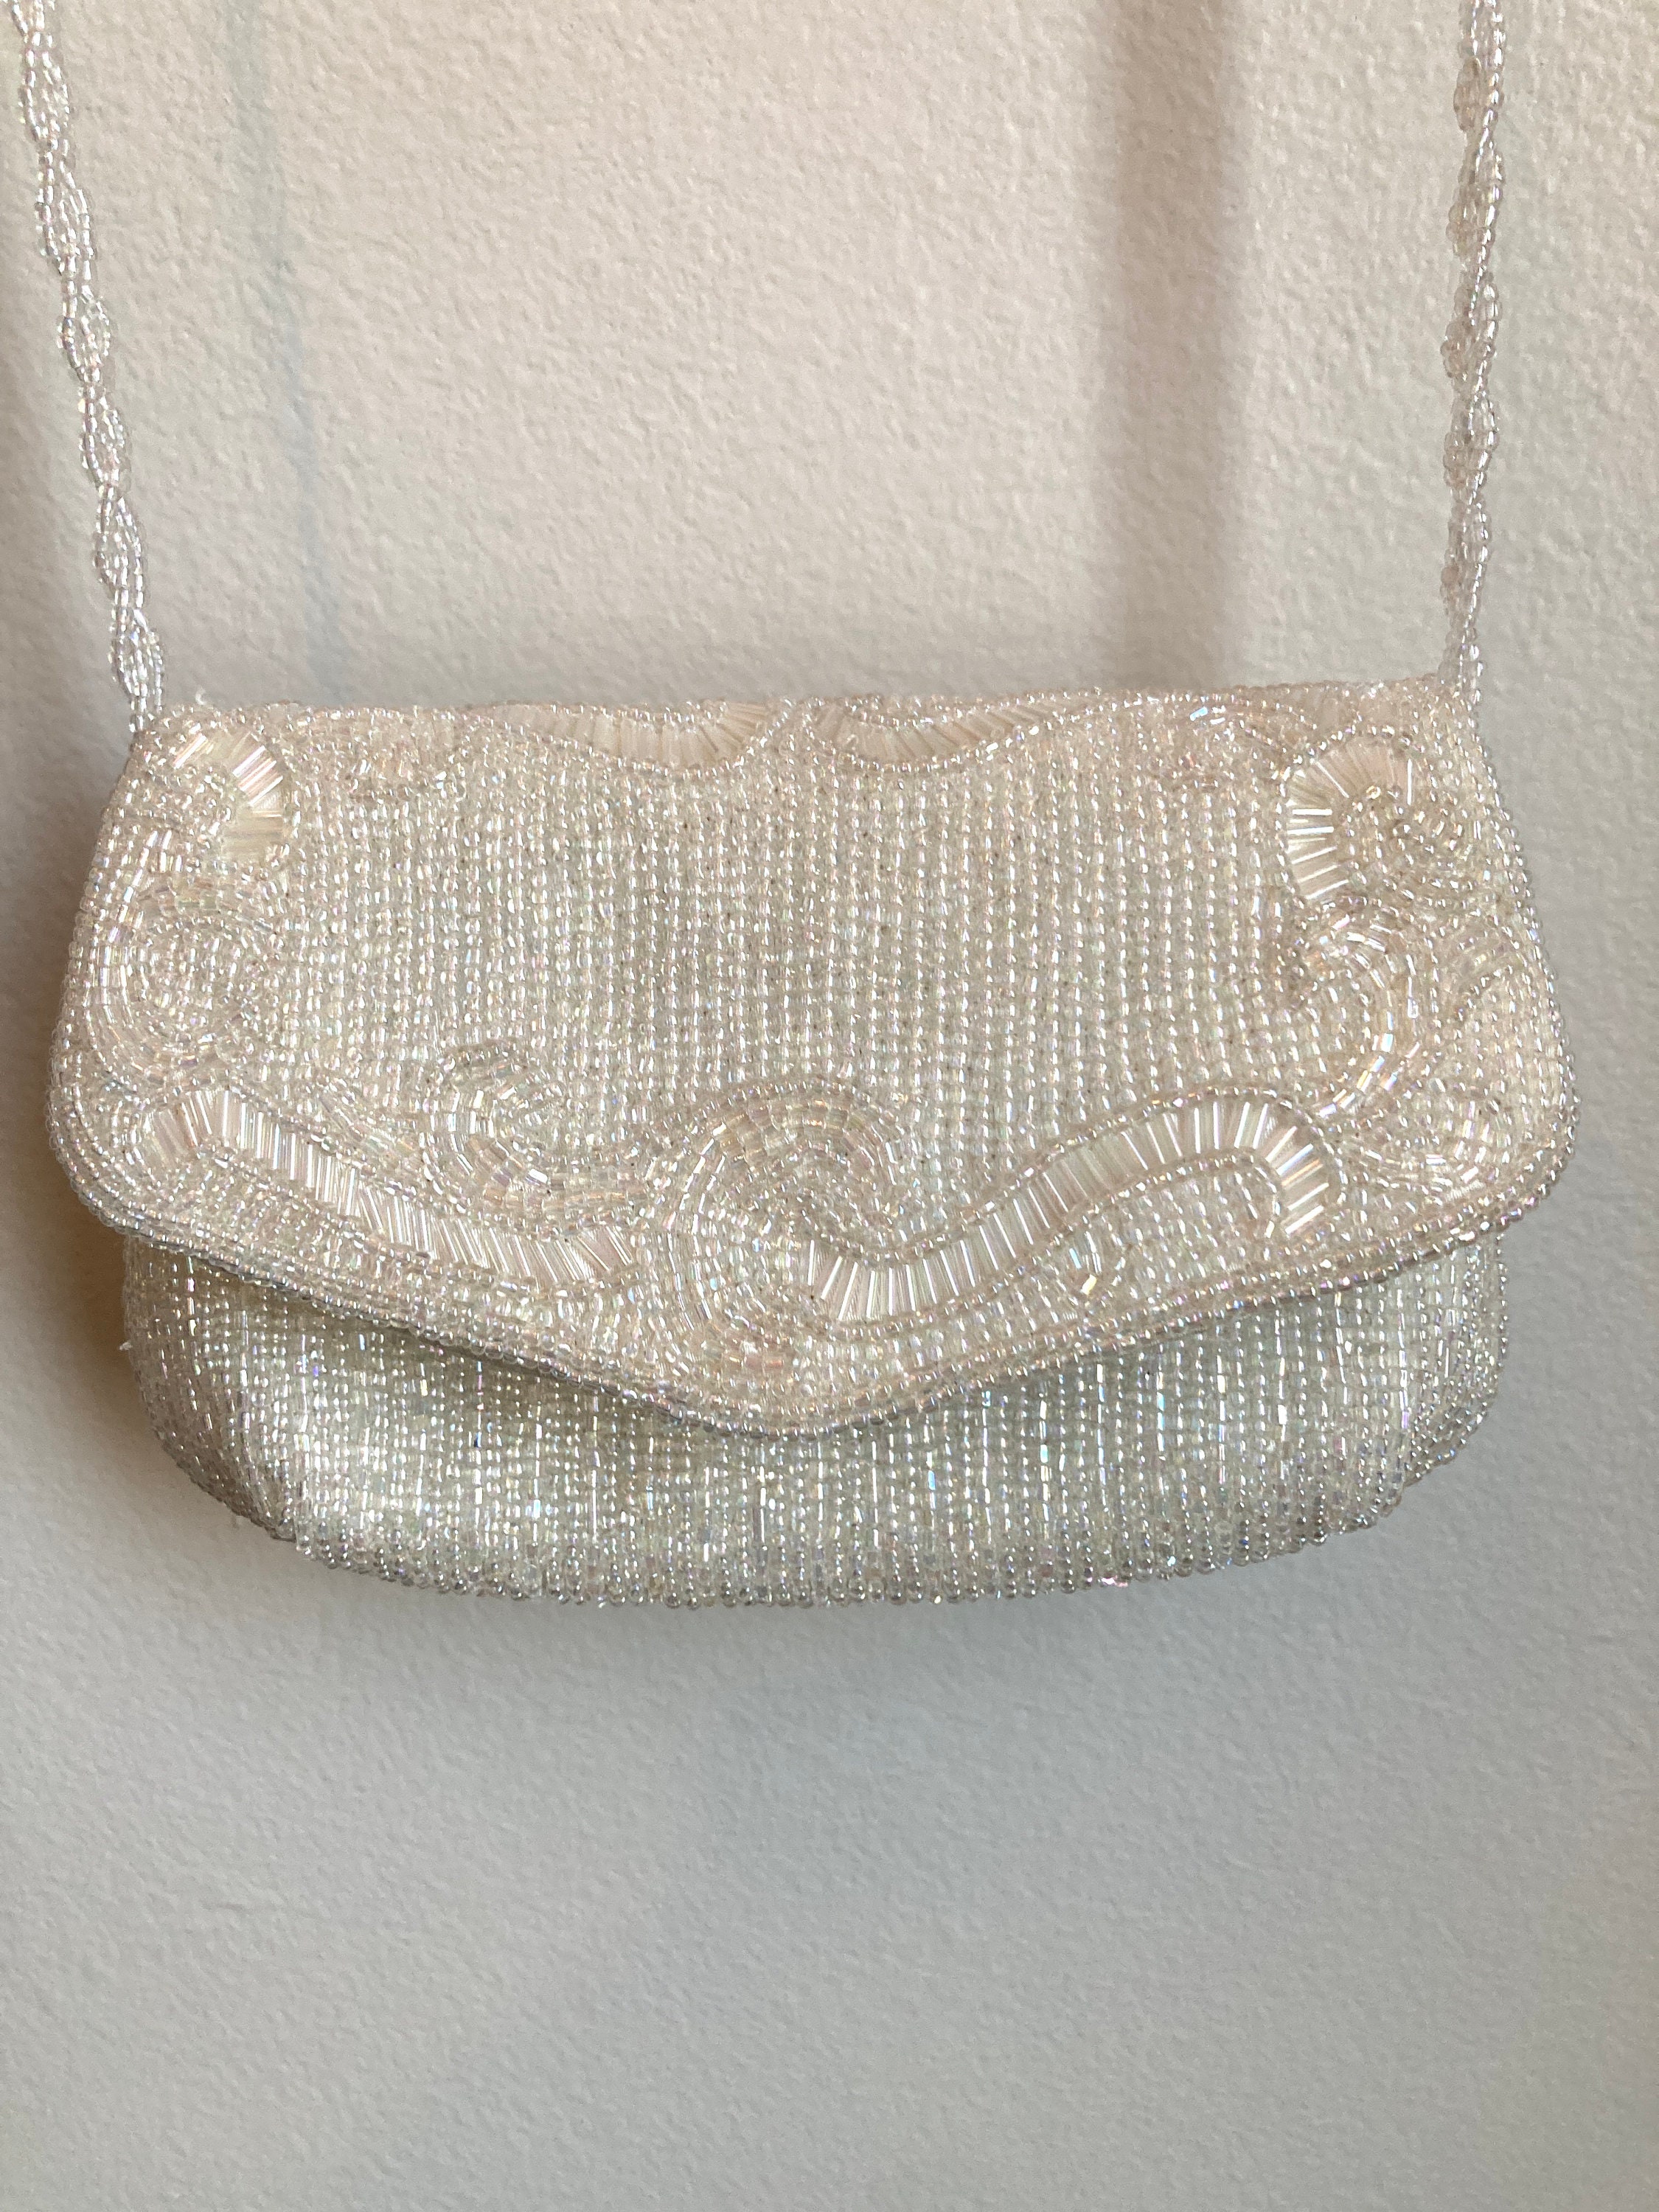 La Regale Ltd. Evening Bag, Hand Beaded, White Pearlescent with